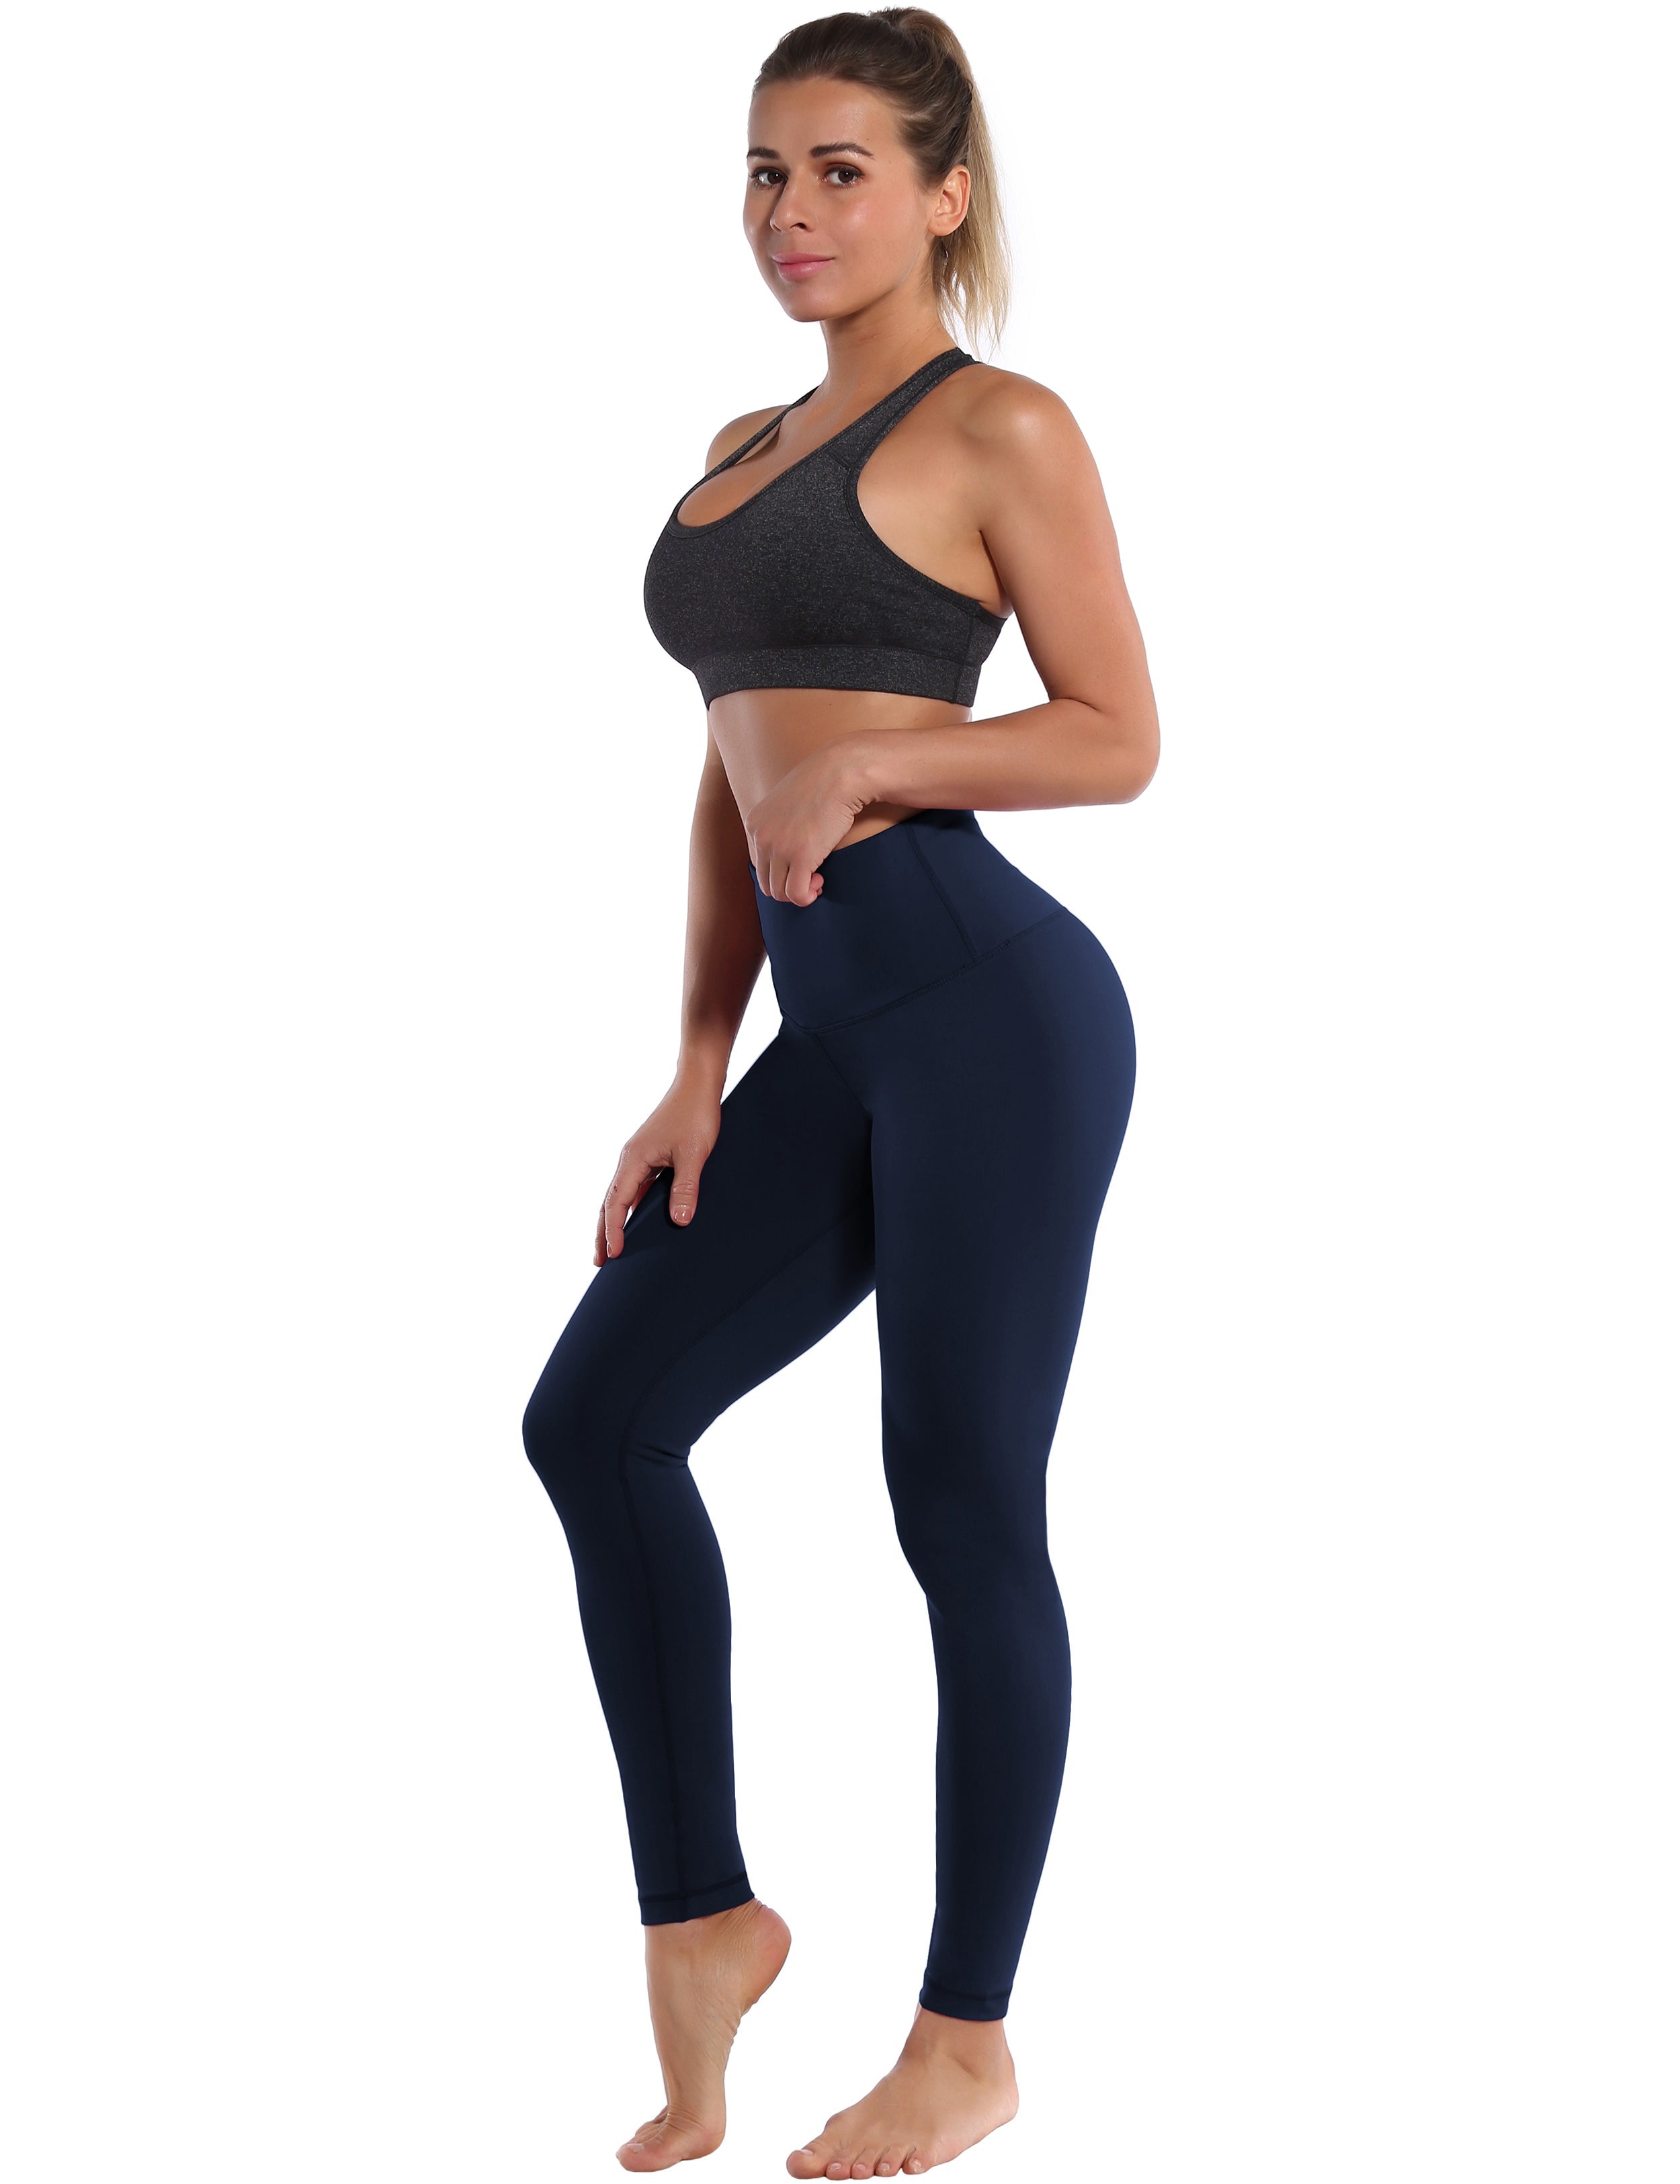 High Waist yogastudio Pants darknavy 75%Nylon/25%Spandex Fabric doesn't attract lint easily 4-way stretch No see-through Moisture-wicking Tummy control Inner pocket Four lengths